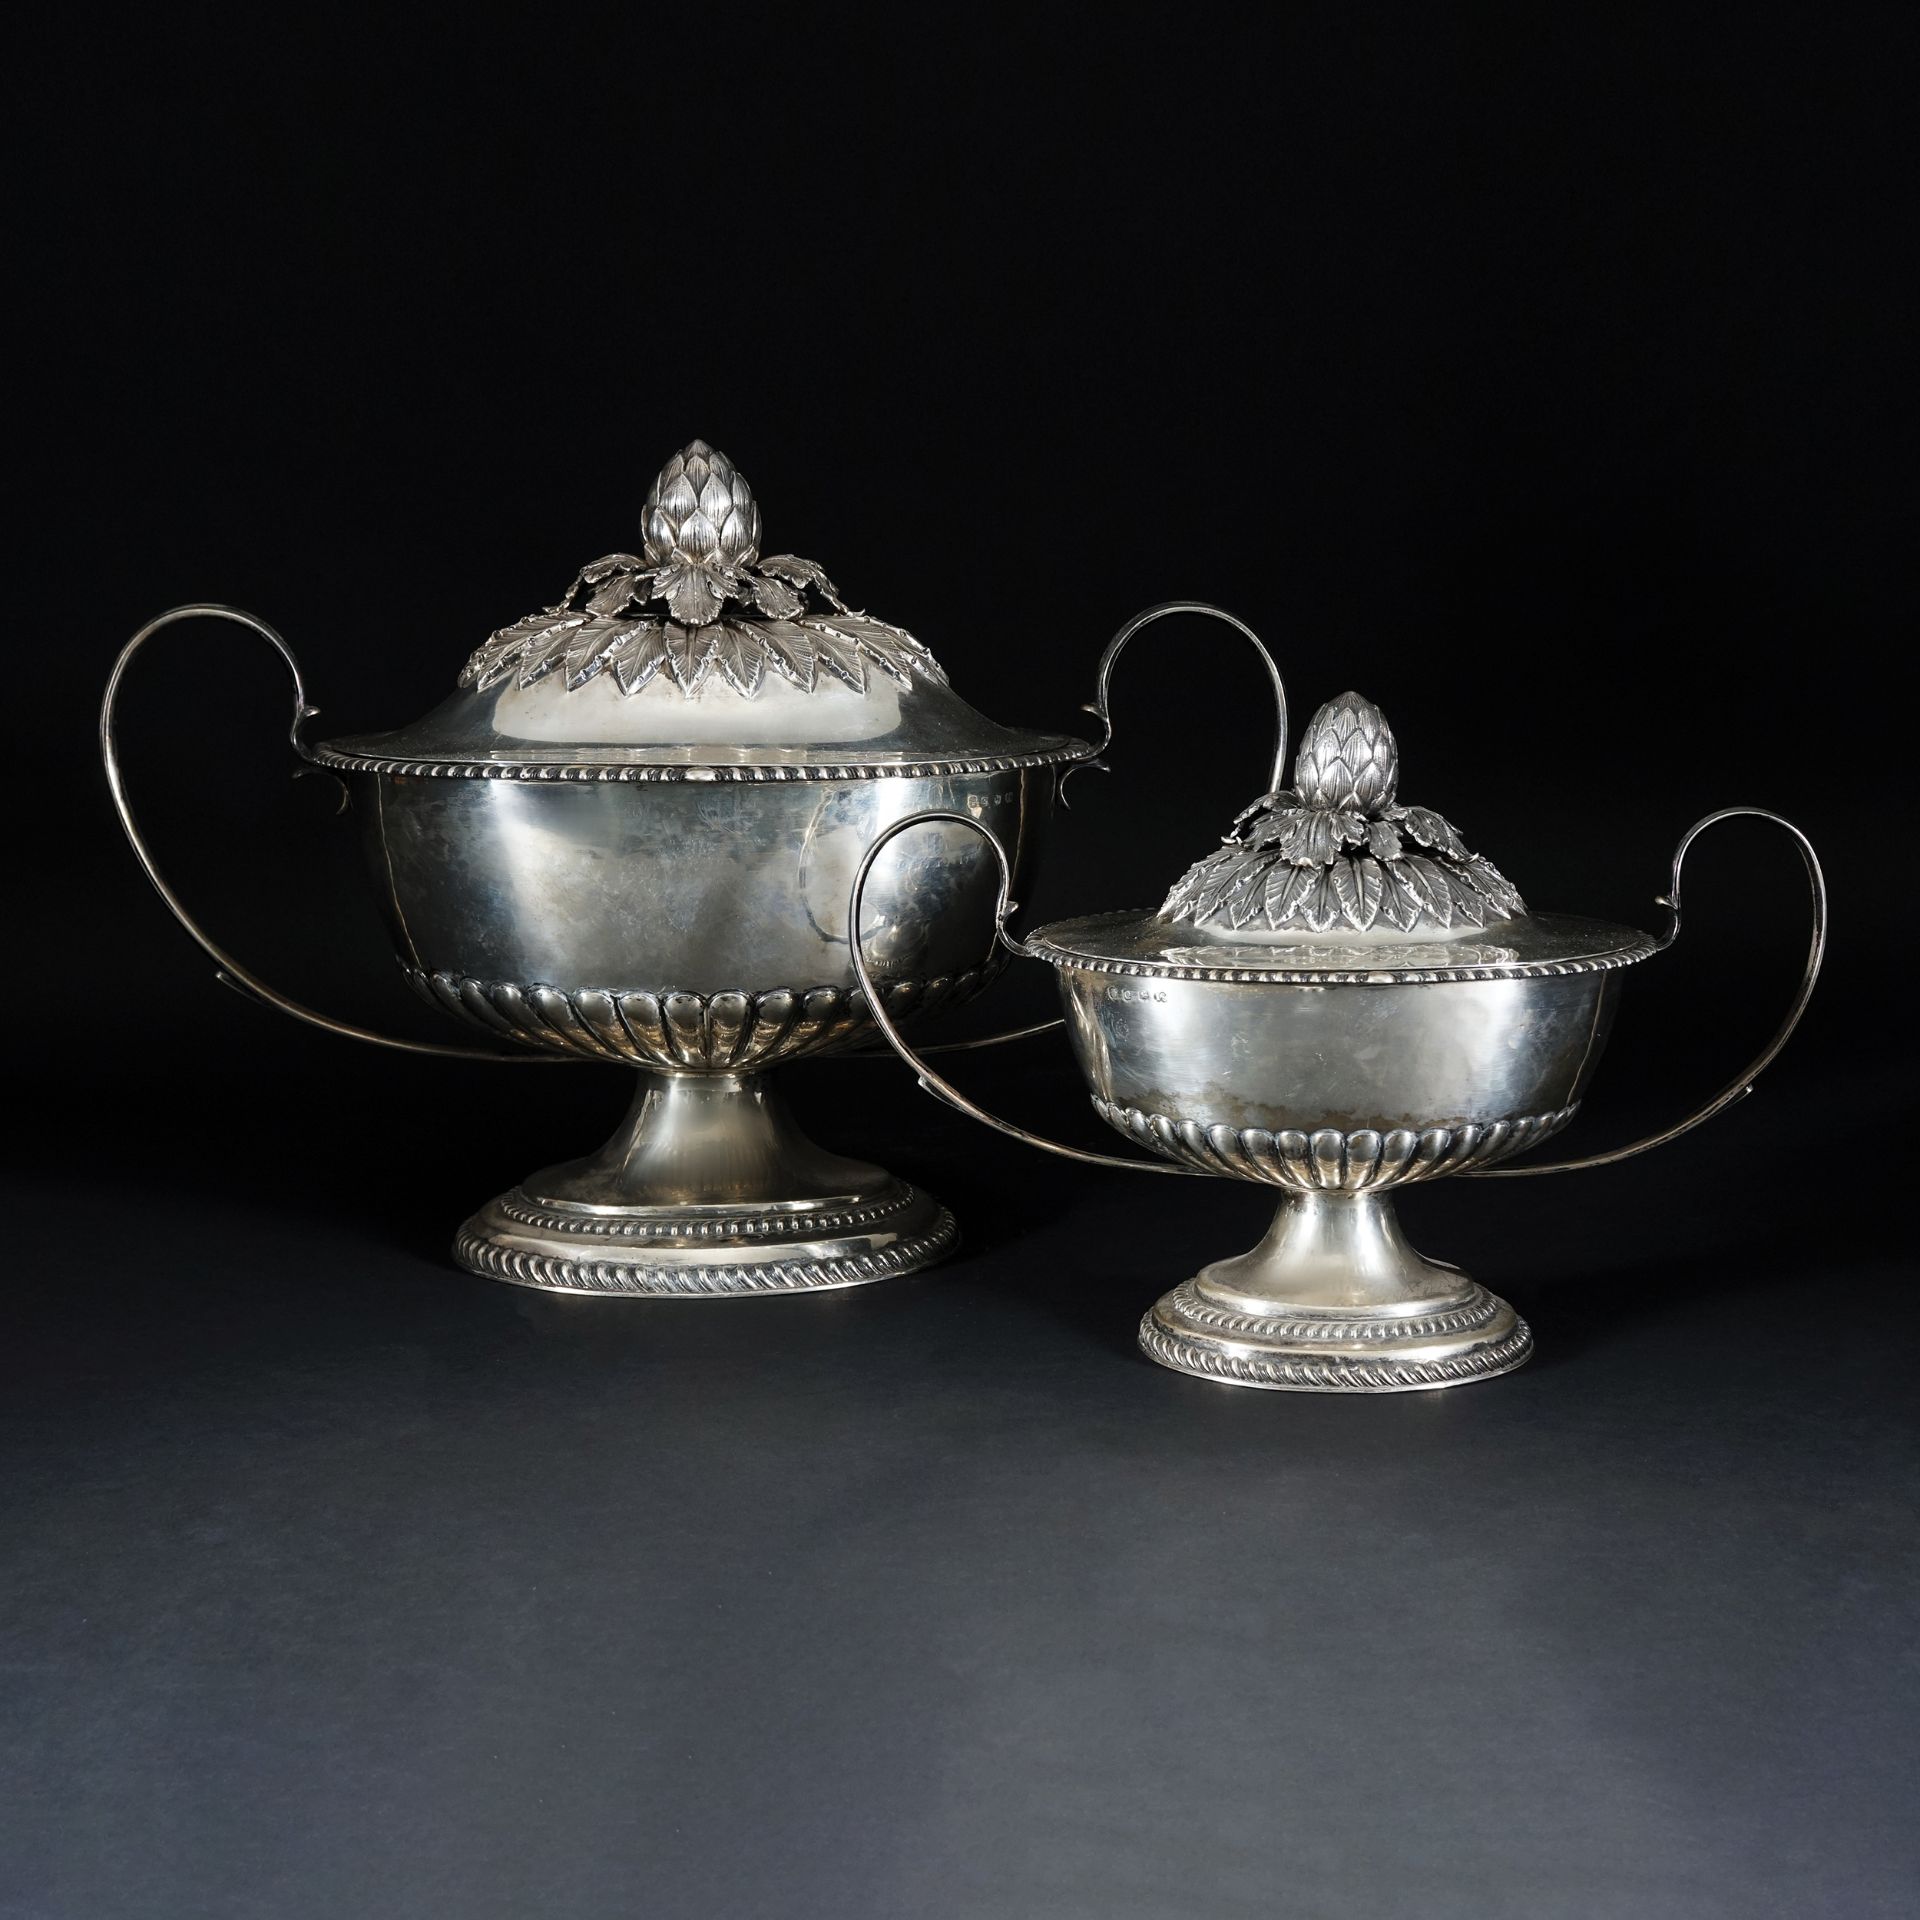 2 sterling silver tureens and covers, London, 1778, John Scofield 33x47x26cm. and 24x35x18cm., 4.